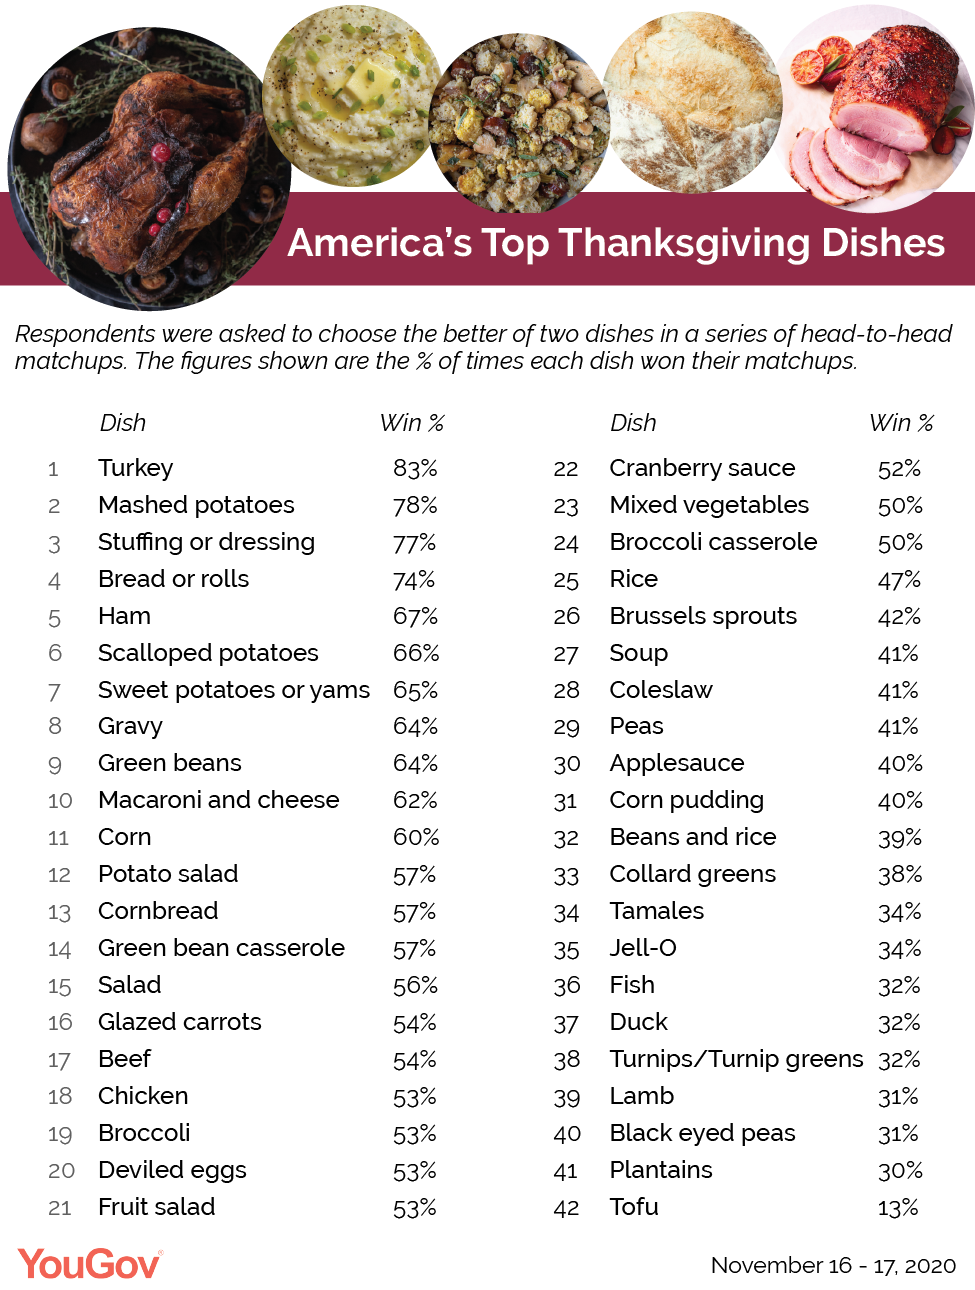 What is the most popular Thanksgiving dish? | YouGov